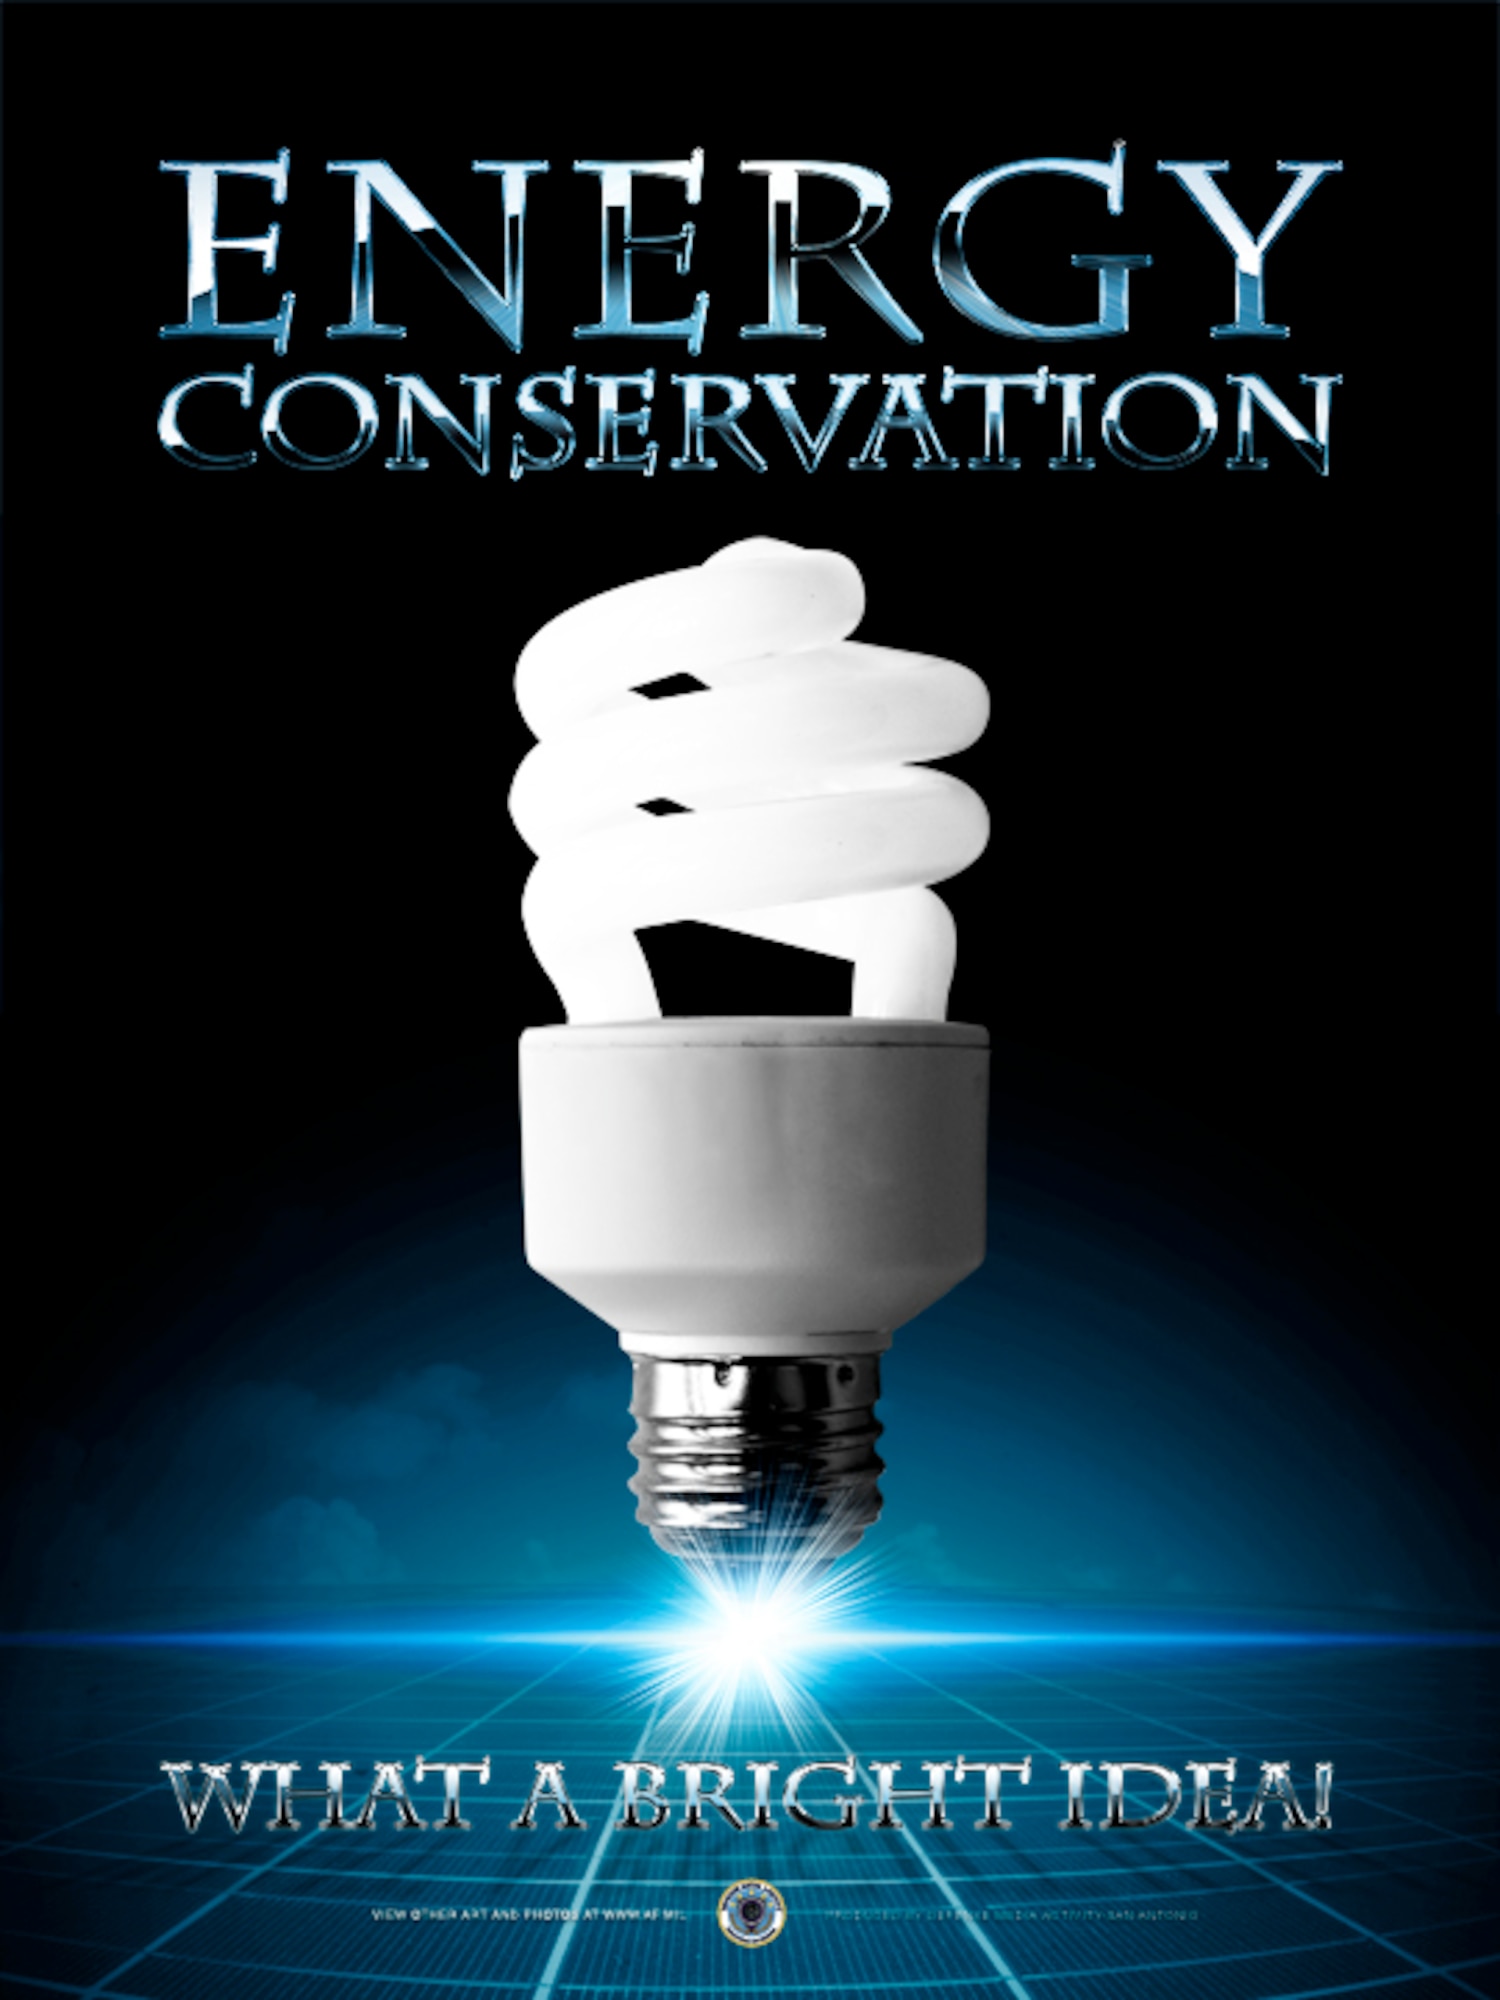 Energy Conservation 2009. This poster was created by Luke Borland of the Defense Media Activity-San Antonio. AF.mil does not provide printed posters but a PDF file of this poster is available for local printing up to 18x24 inches. Requests can be made to afgraphics@dma.mil. Please specify the title and number.
